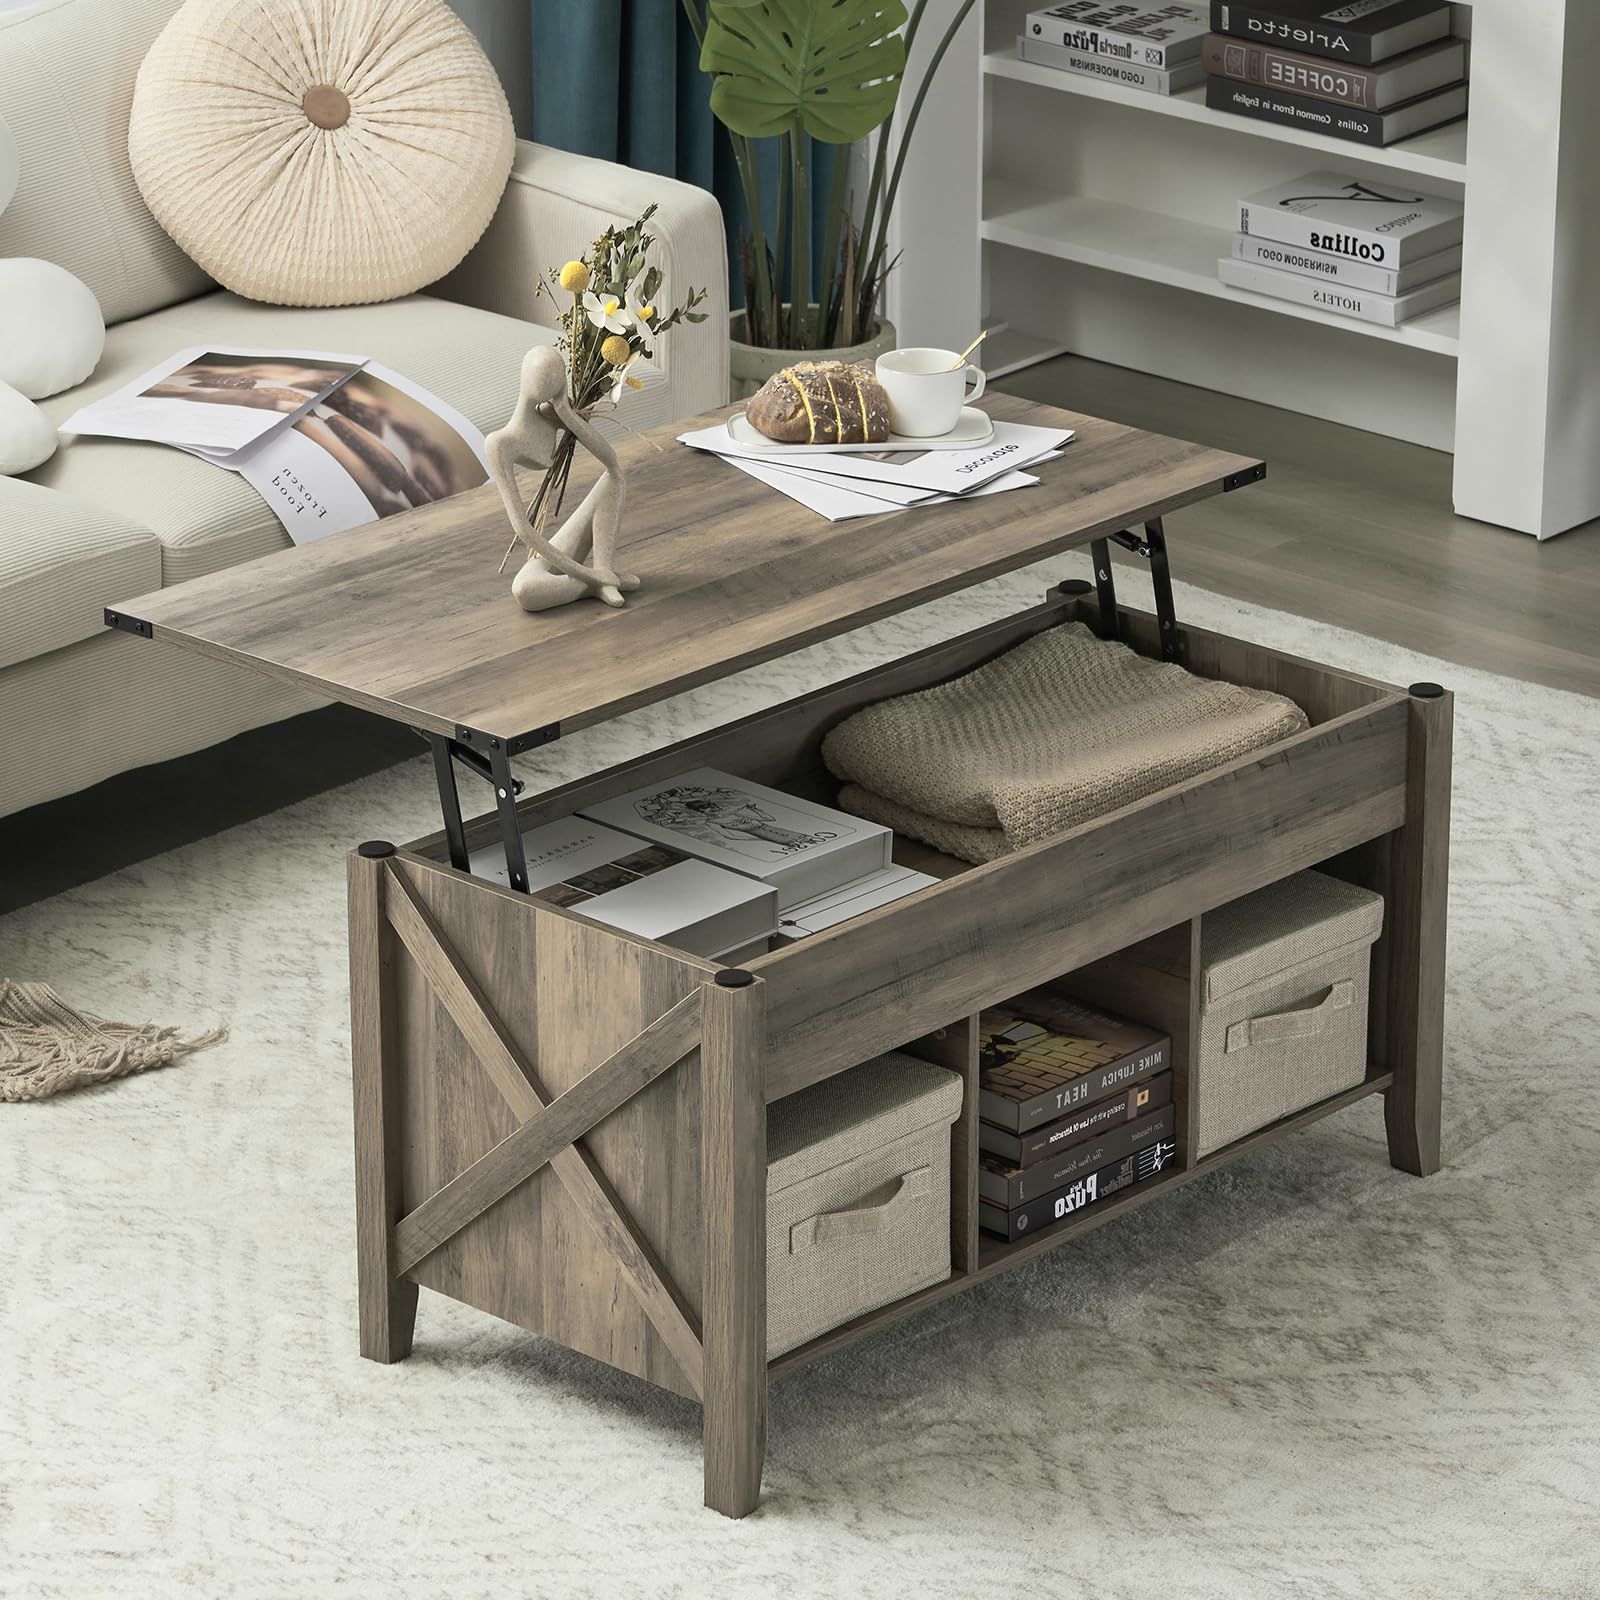 Farmhouse Lift Top Tables Intended For Most Current Vingli Farmhouse Lift Top Coffee Table, Rustic Grey Coffee Table With Lift  Top, Lift Up Pop (View 5 of 10)